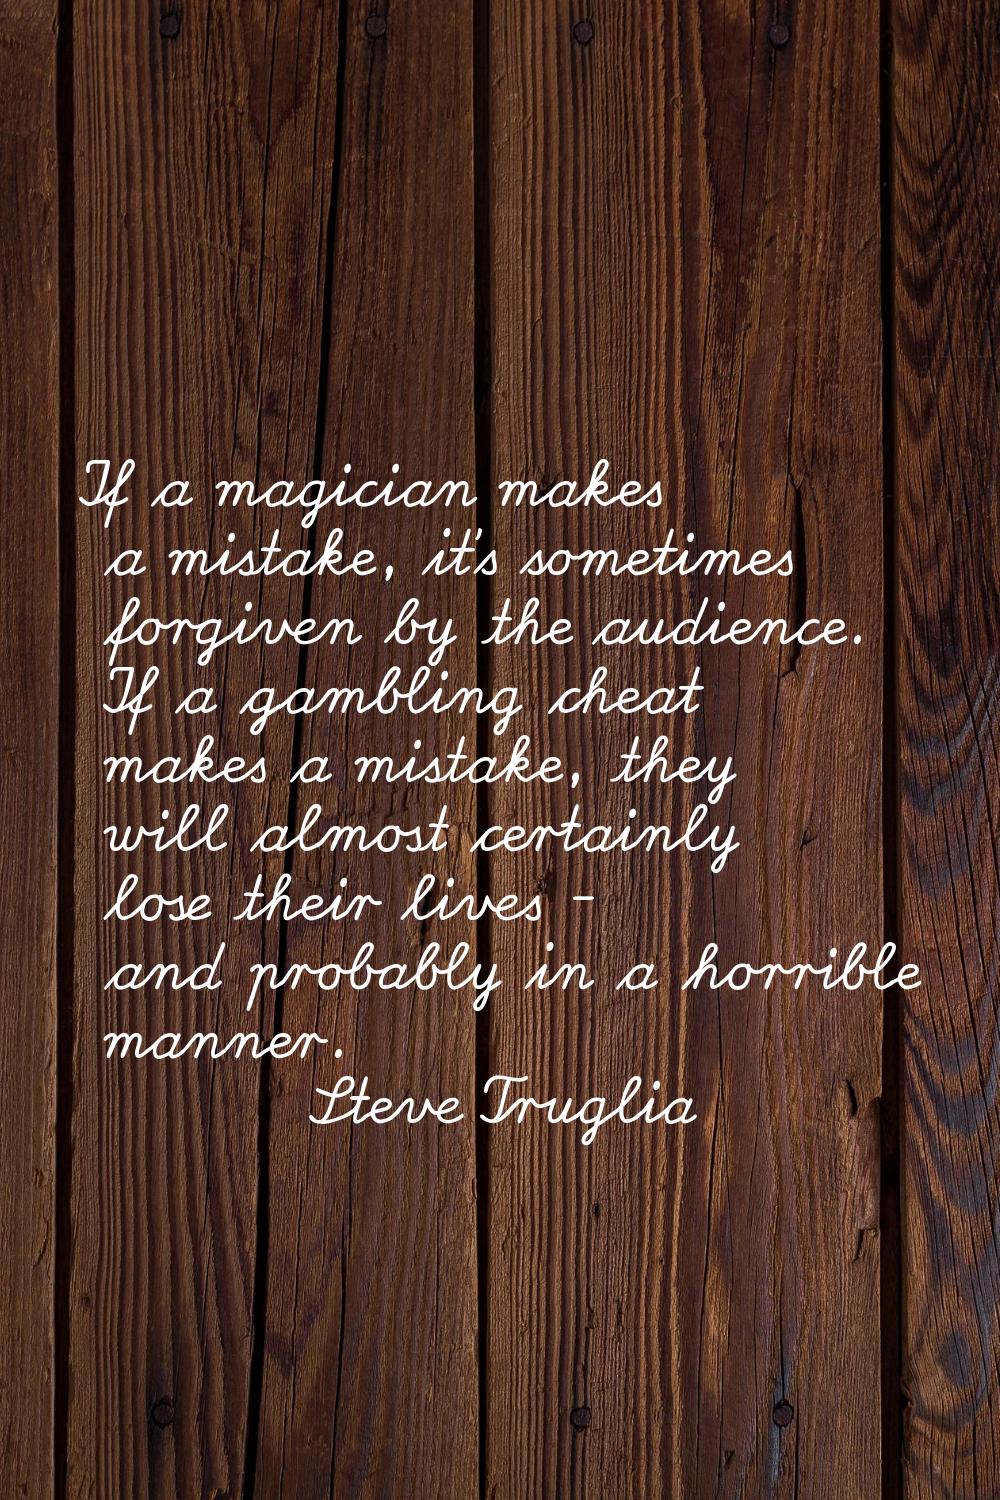 If a magician makes a mistake, it's sometimes forgiven by the audience. If a gambling cheat makes a